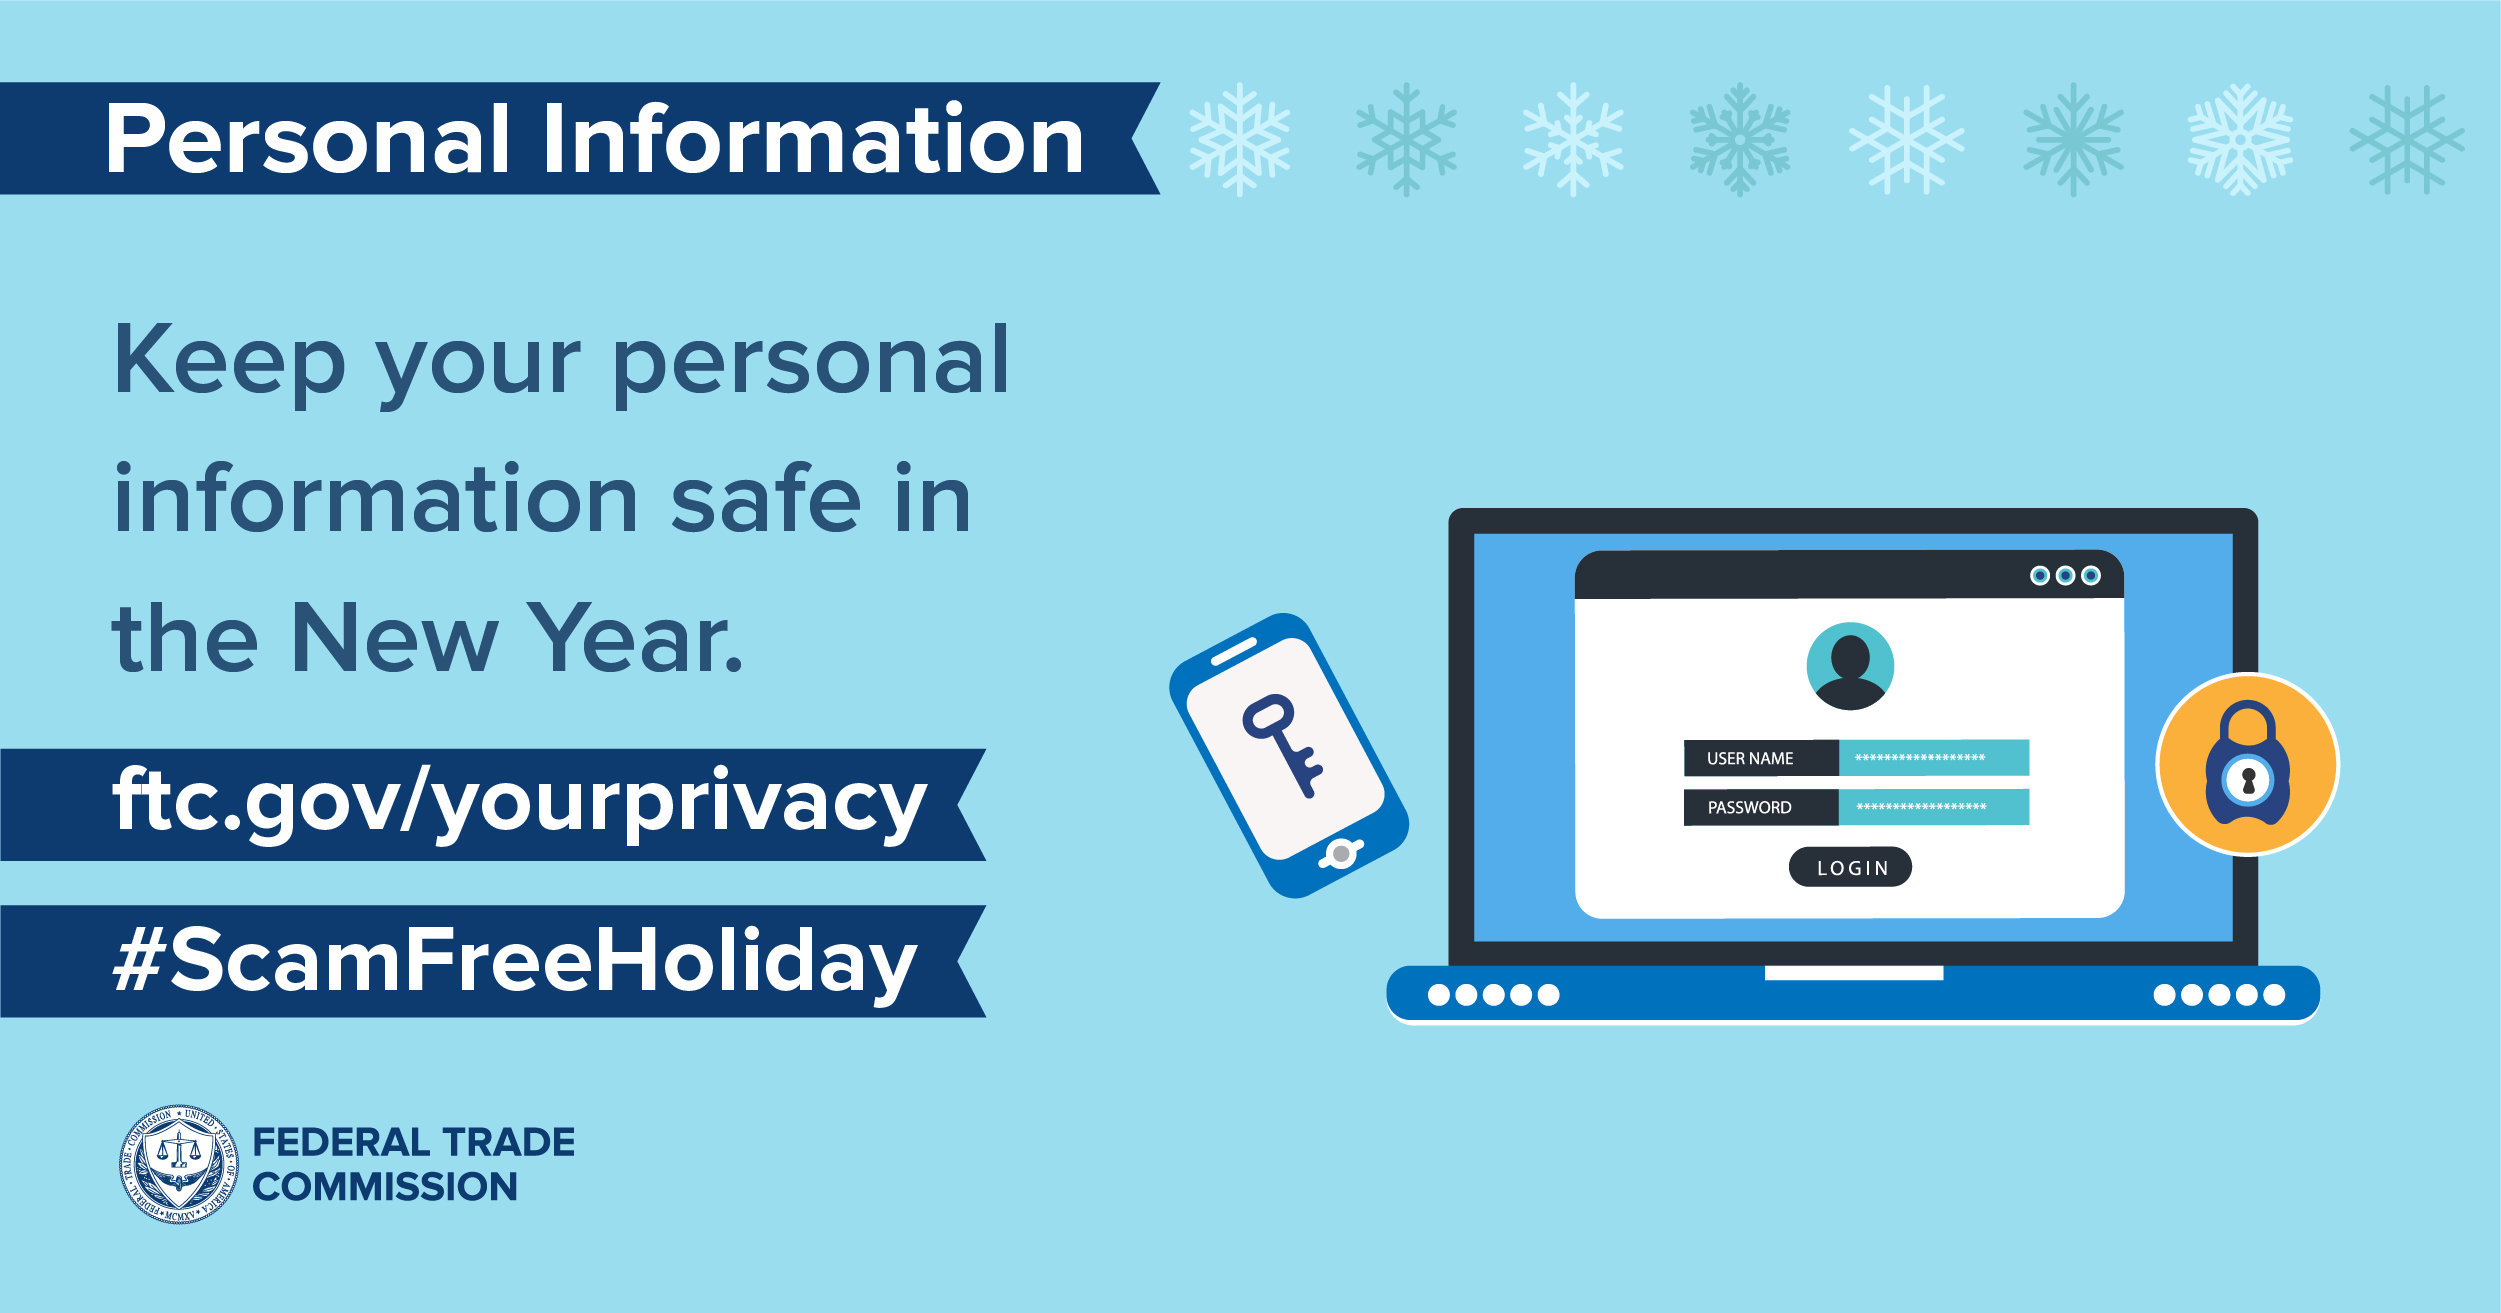 Keep your personal information safe in the New Year